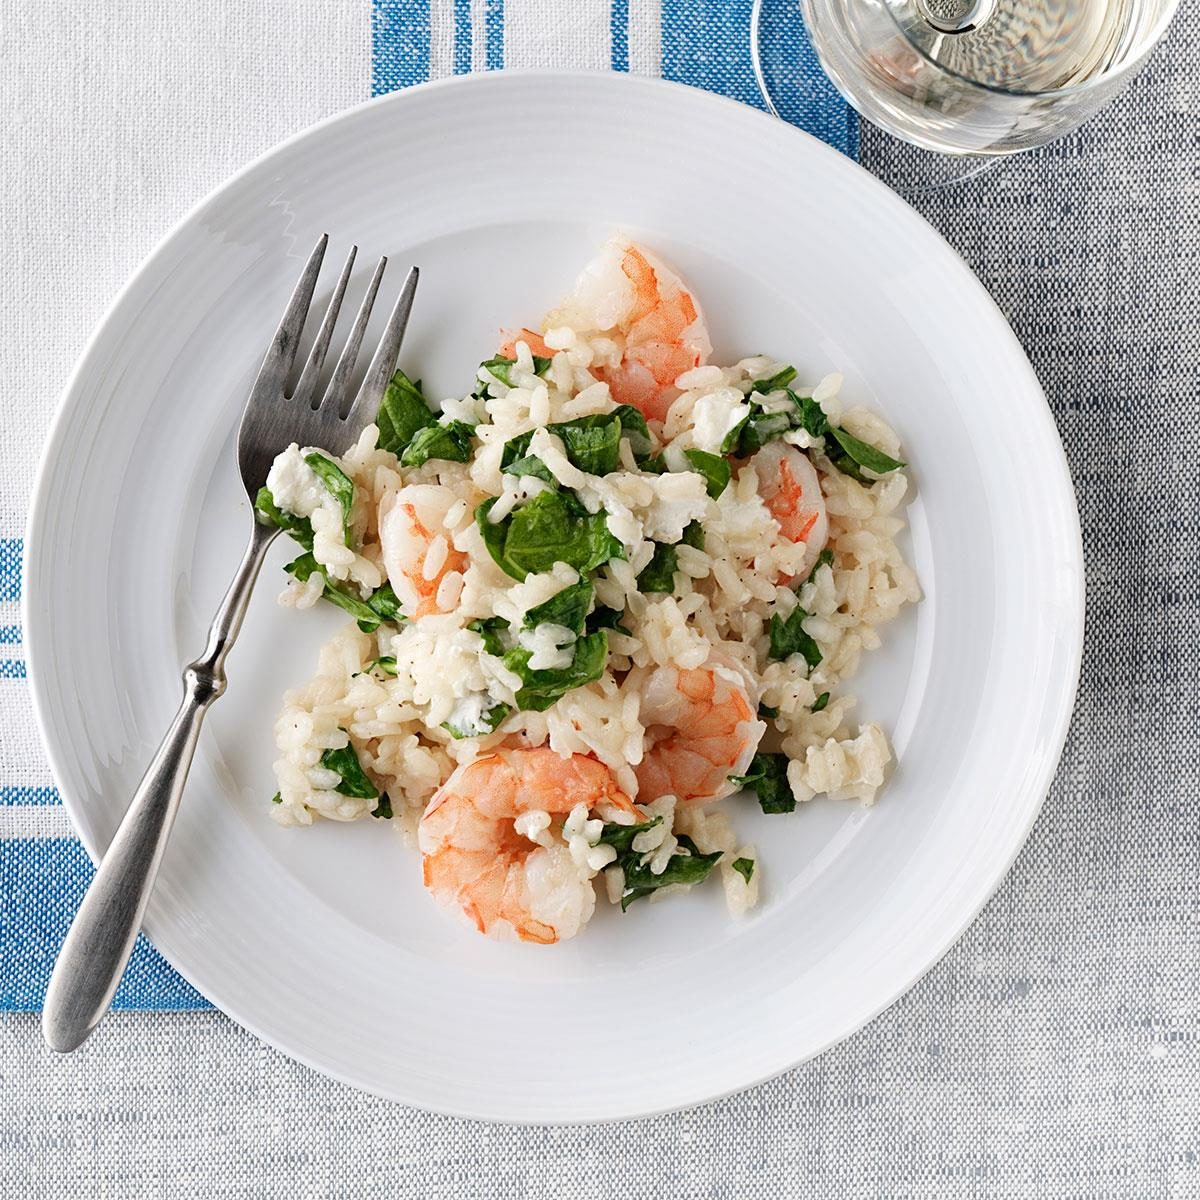 https://www.tasteofhome.com/wp-content/uploads/2018/01/Hearty-Shrimp-Risotto_exps134312_THHC2238742B09_19_5bC_RMS-2.jpg?fit=700%2C1024